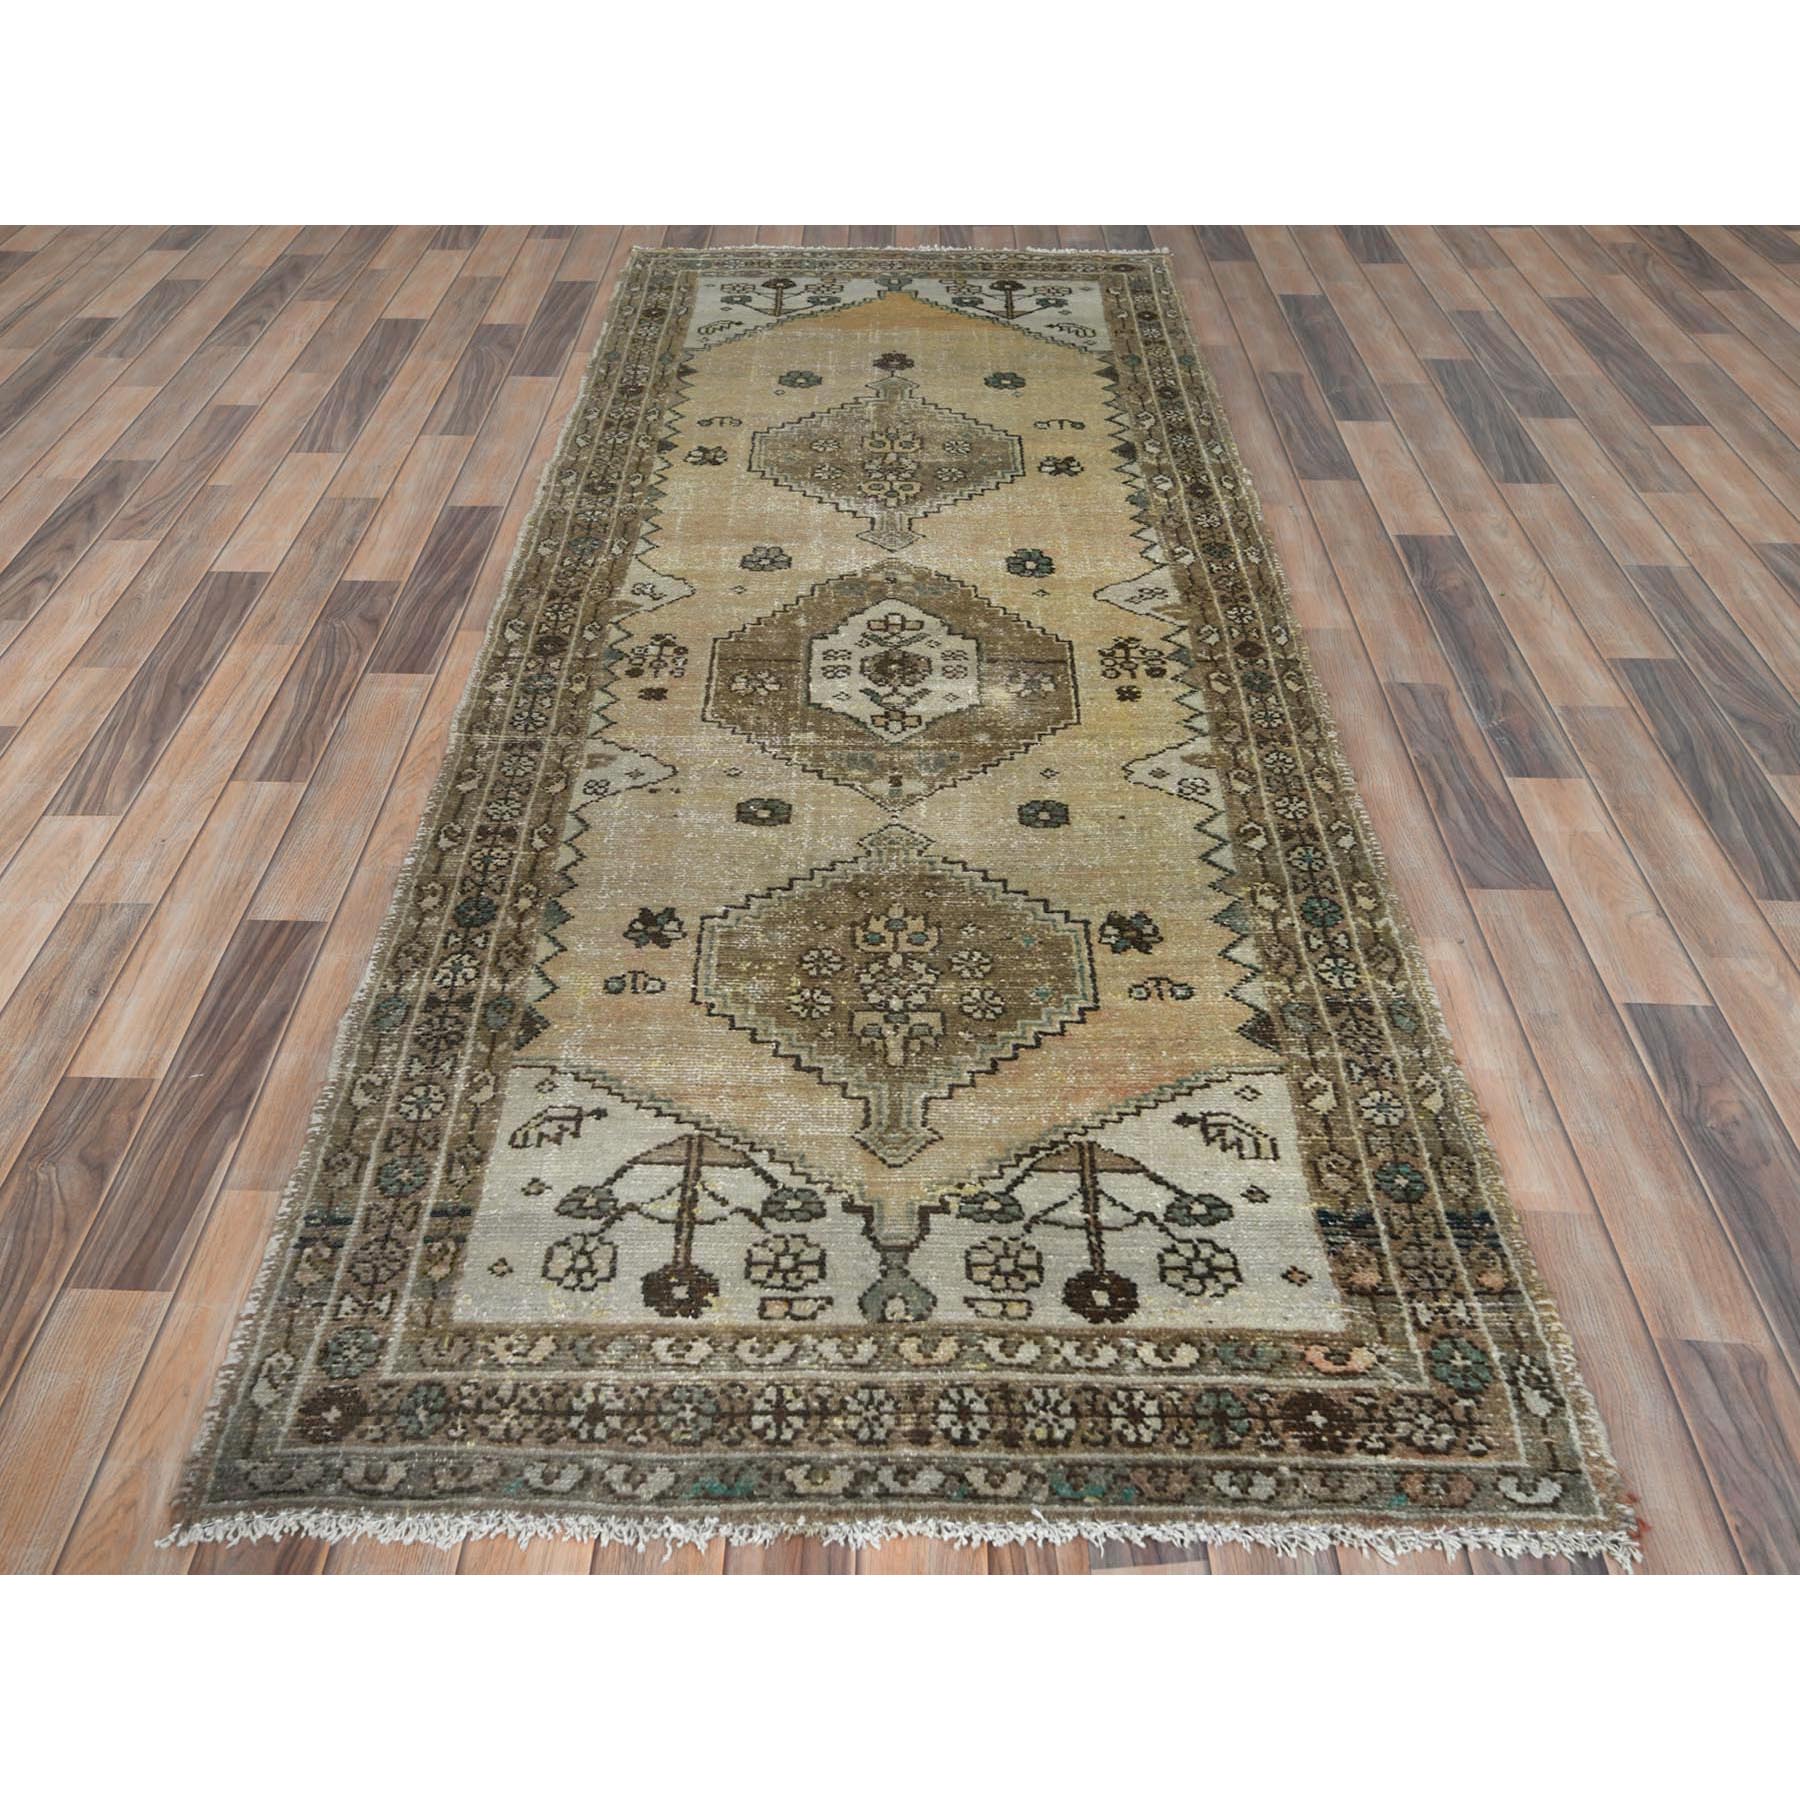 3'7"x9'3" Sand Color Vintage Persian Bakhtiar with Open Field and Large Medallions Design, Hand Woven, Worn Down, Distressed Look, Pure Wool Wide Runner Oriental Rug 